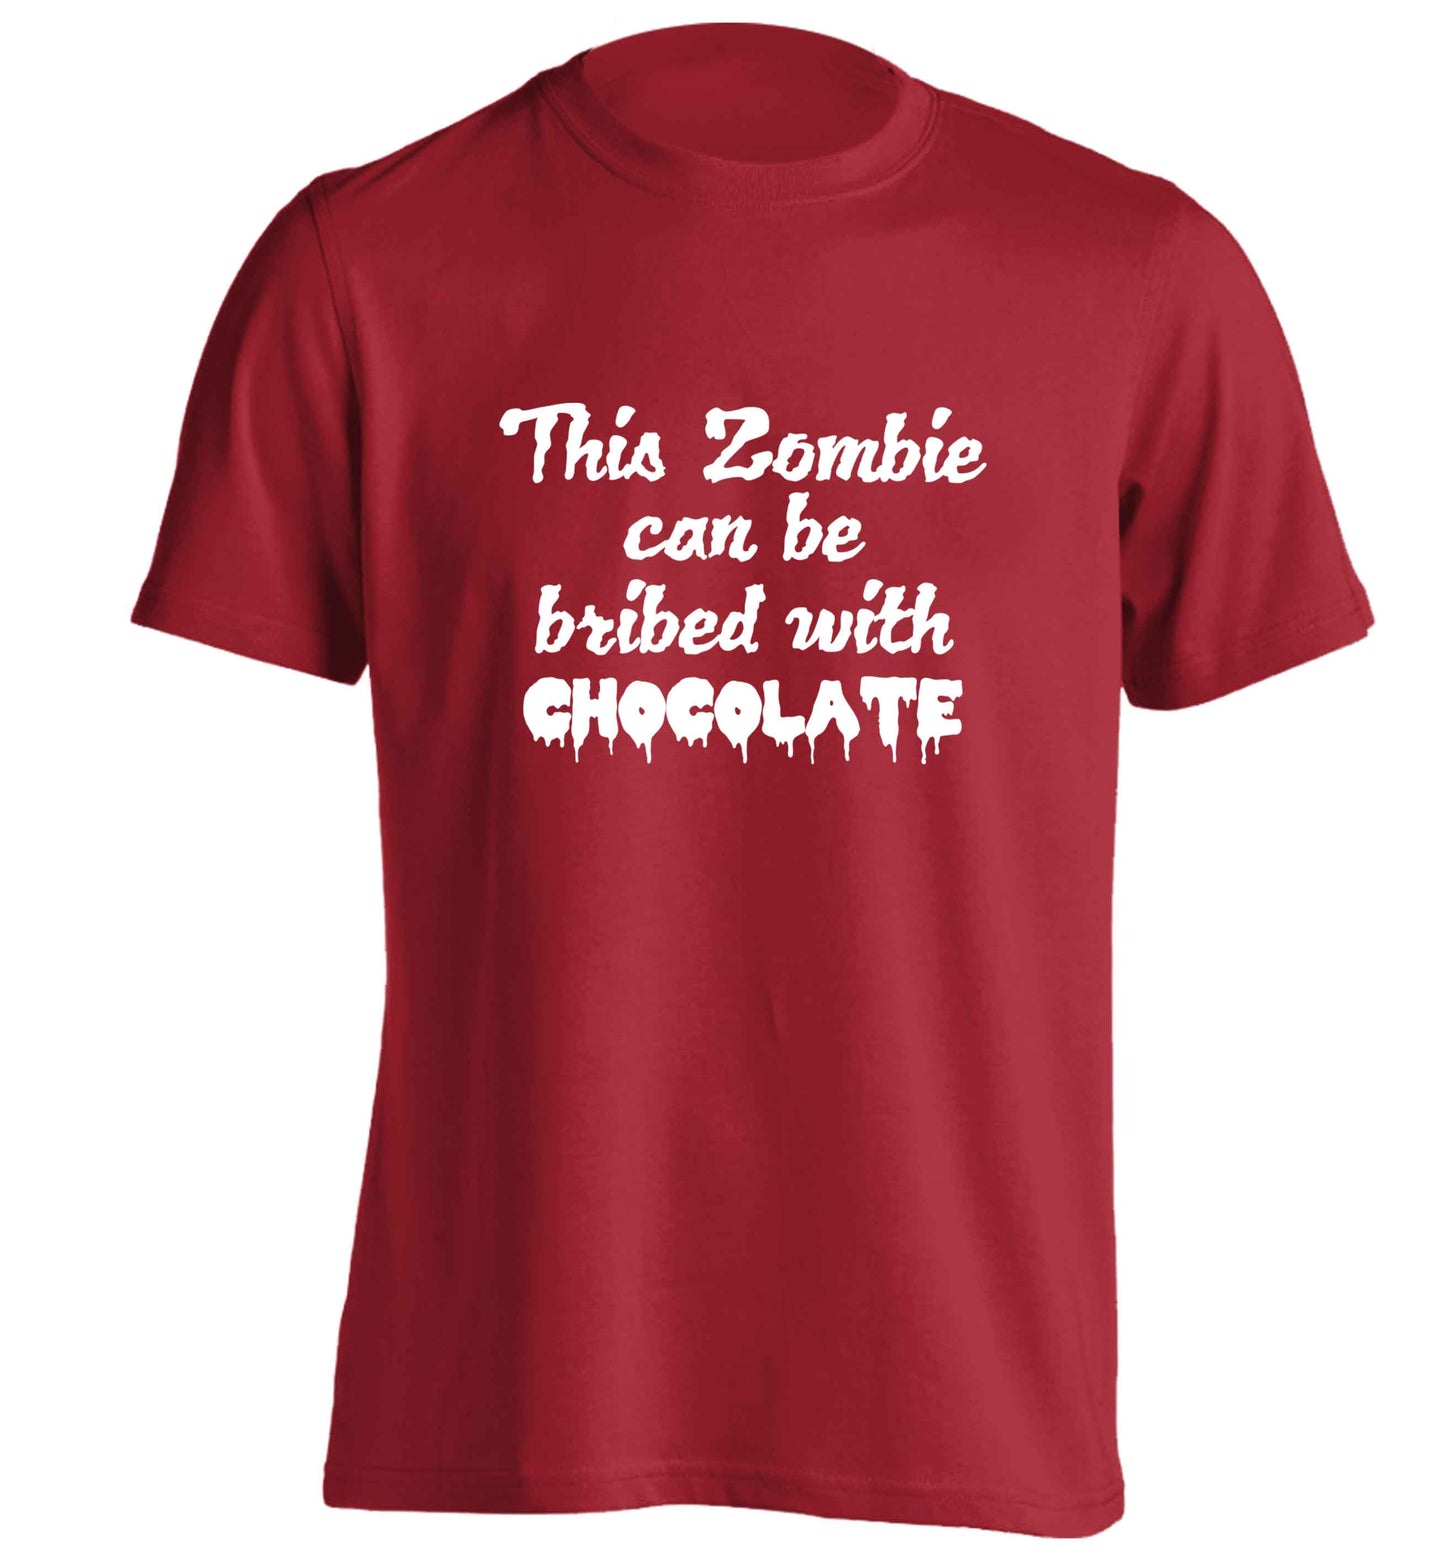 This zombie can be bribed with chocolate adults unisex red Tshirt 2XL